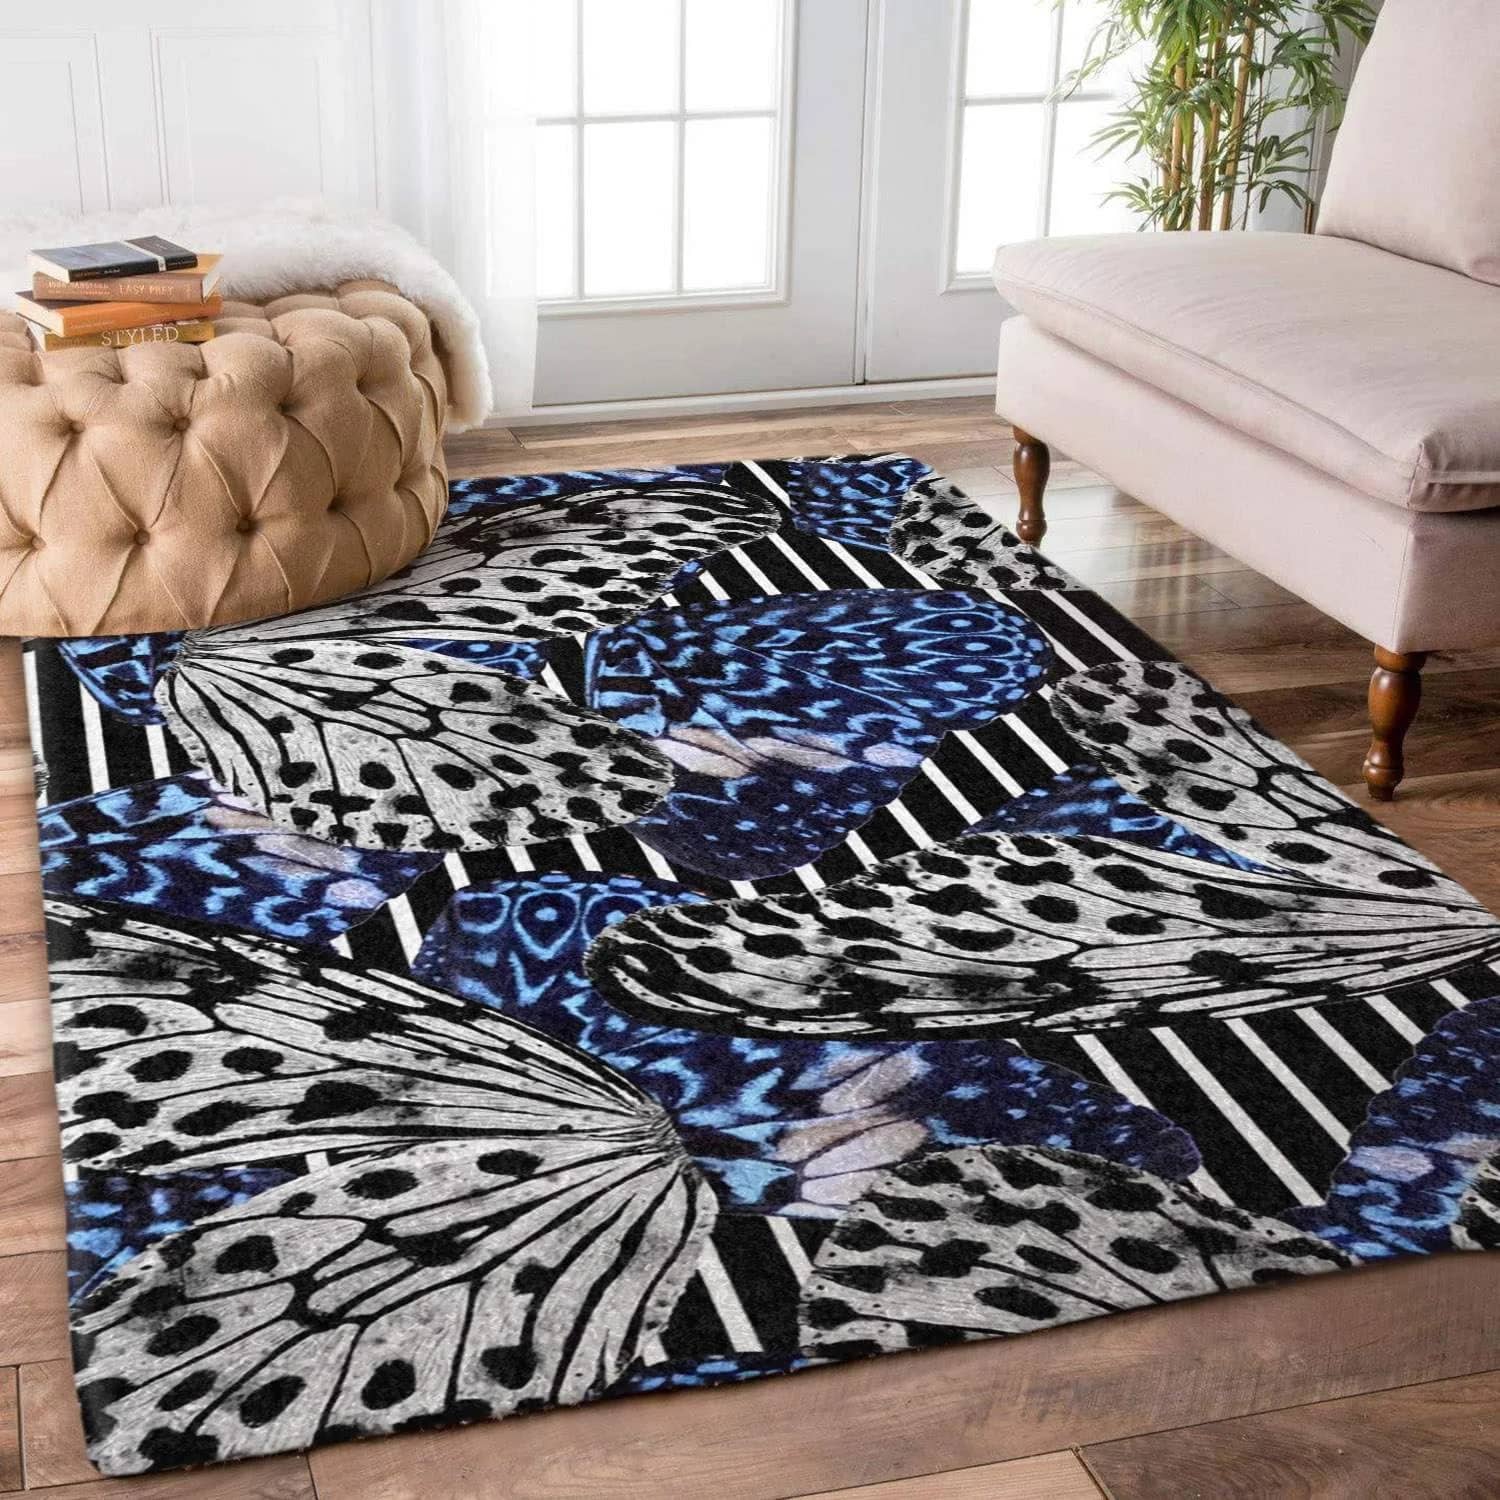 Butterfly Limited Edition Amazon Best Seller Sku 264940 Rug